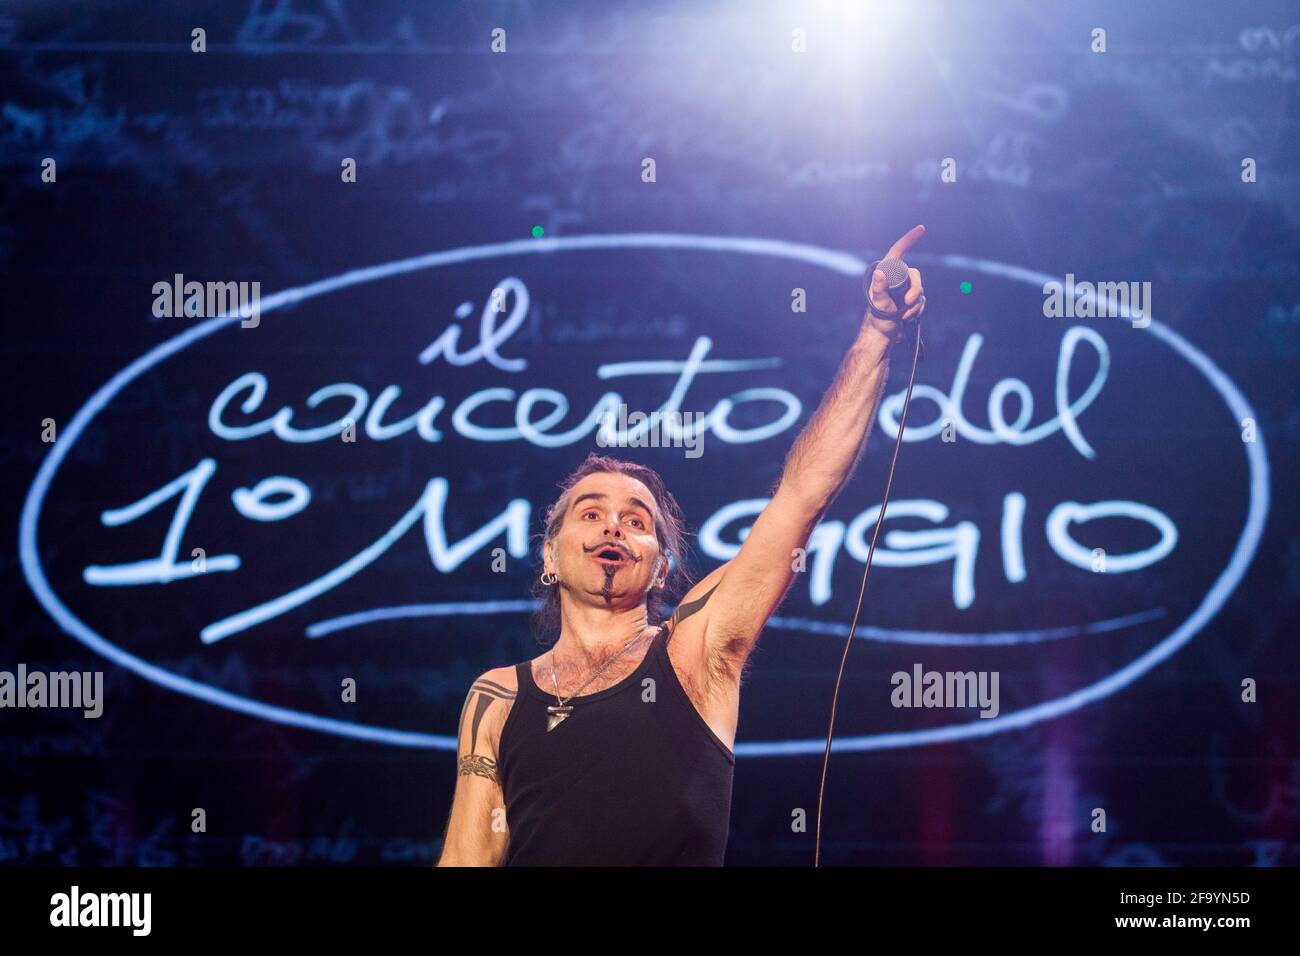 Italian Singer, Piero Pelù and his band performs at 1th may concert, Rome 2014 Stock Photo